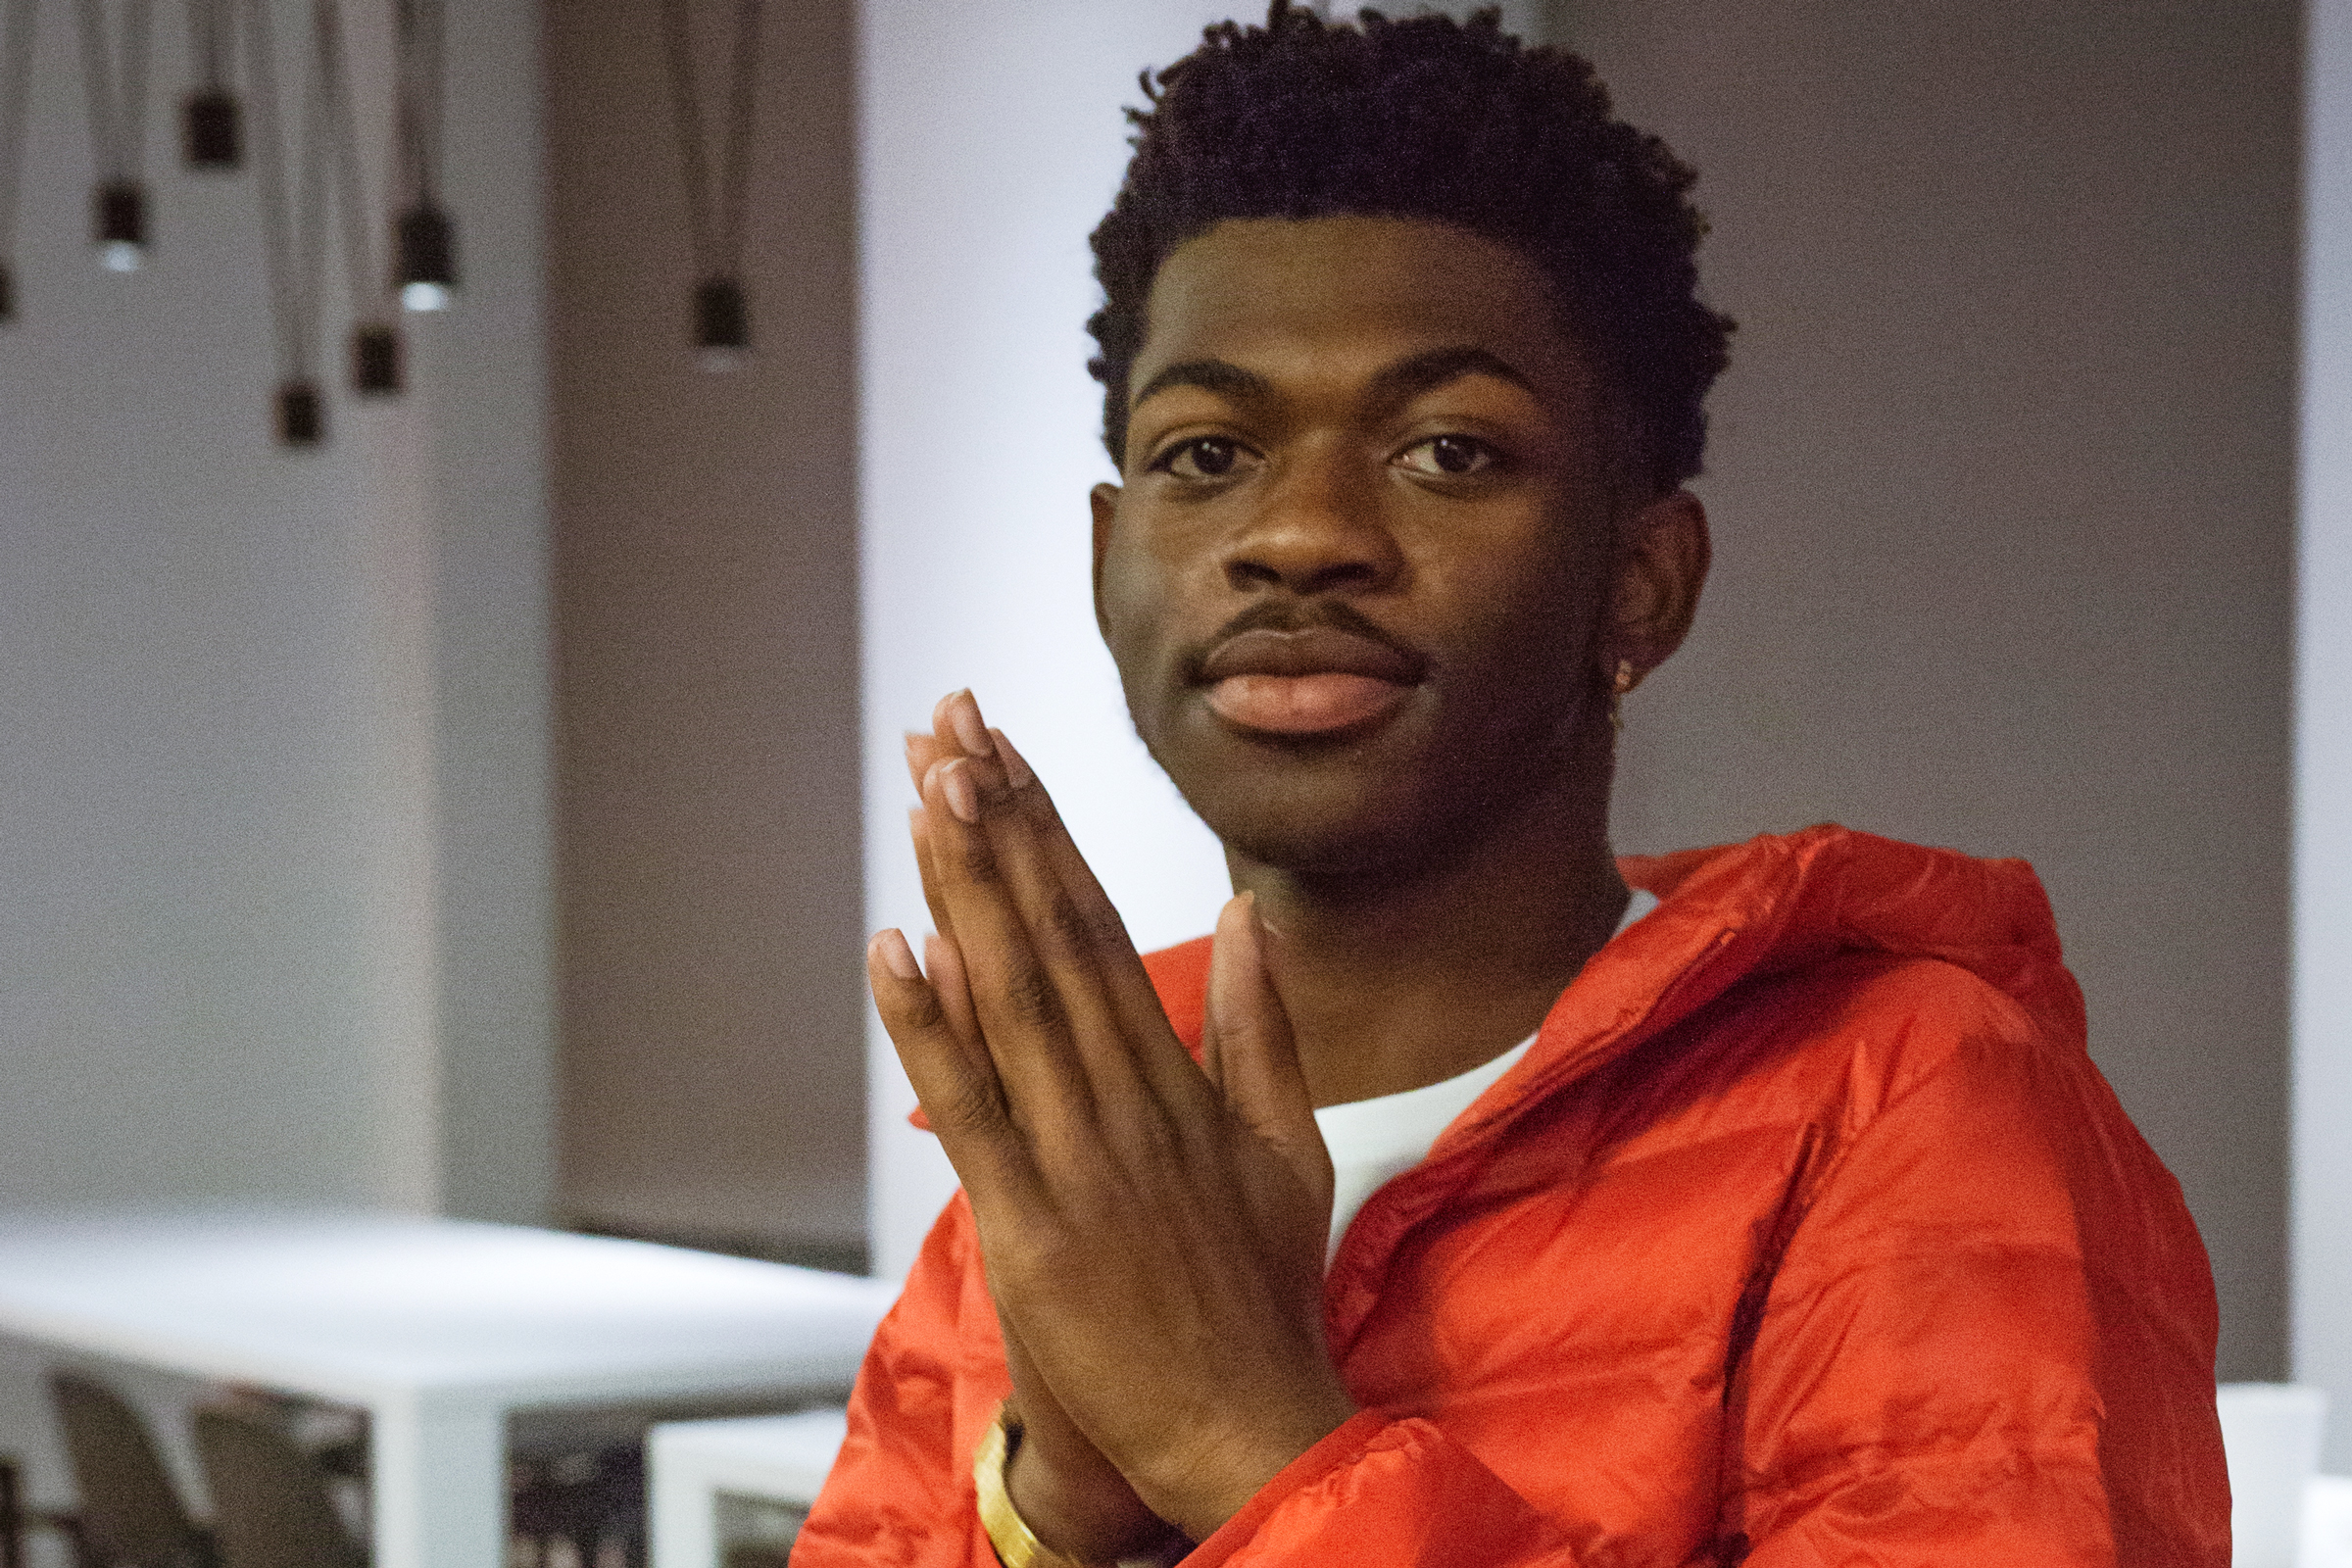 The Billboard Gets Slammed For Removing Lil Nas X “Old Town Road” Song From the Country List